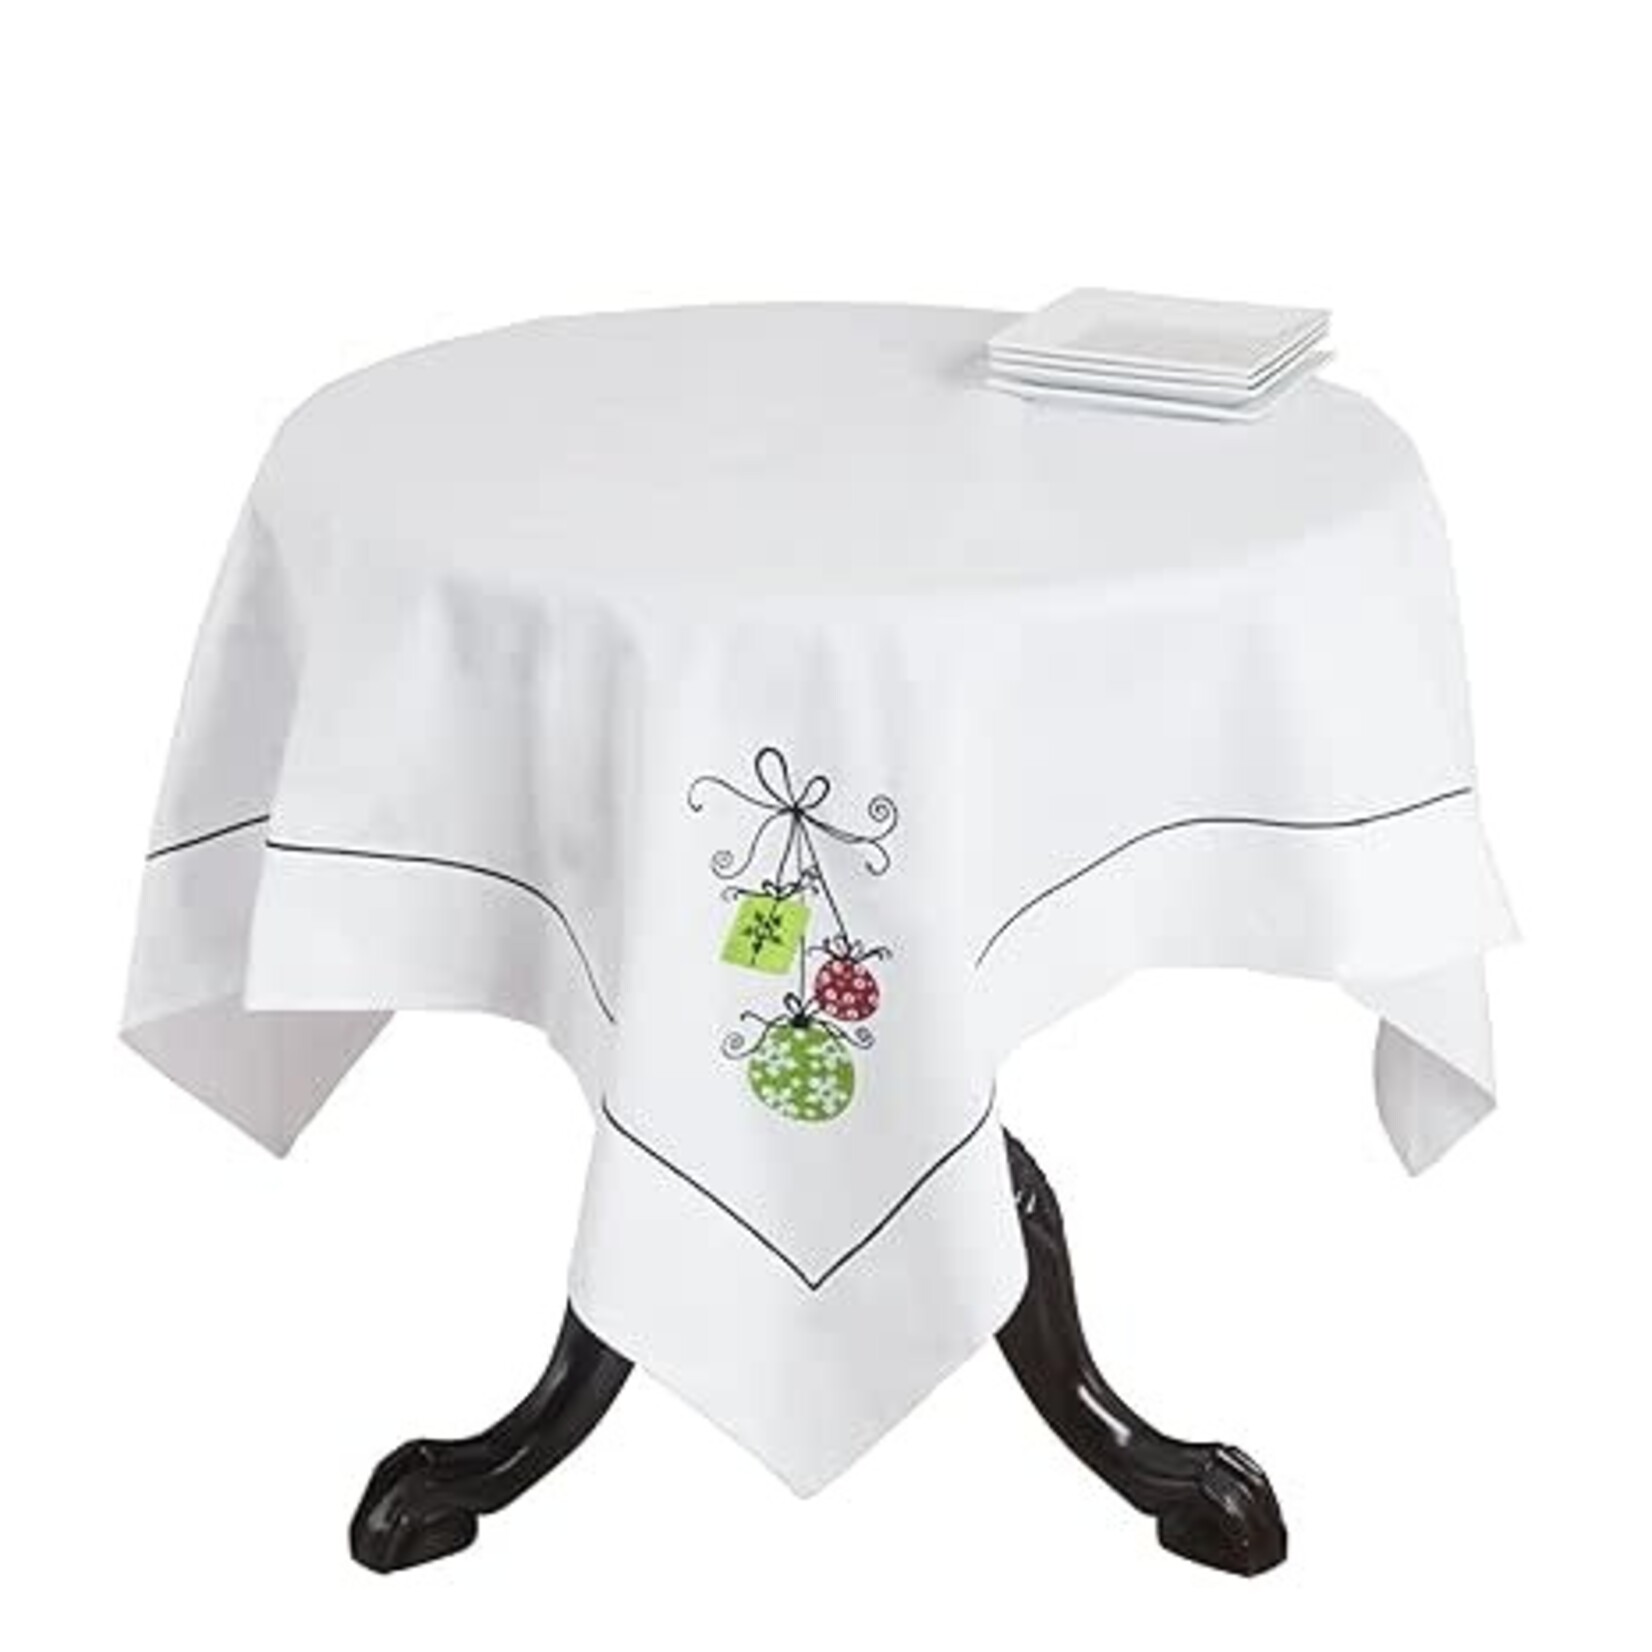 Saro Trading Company French Christmas Tablecloth Topper